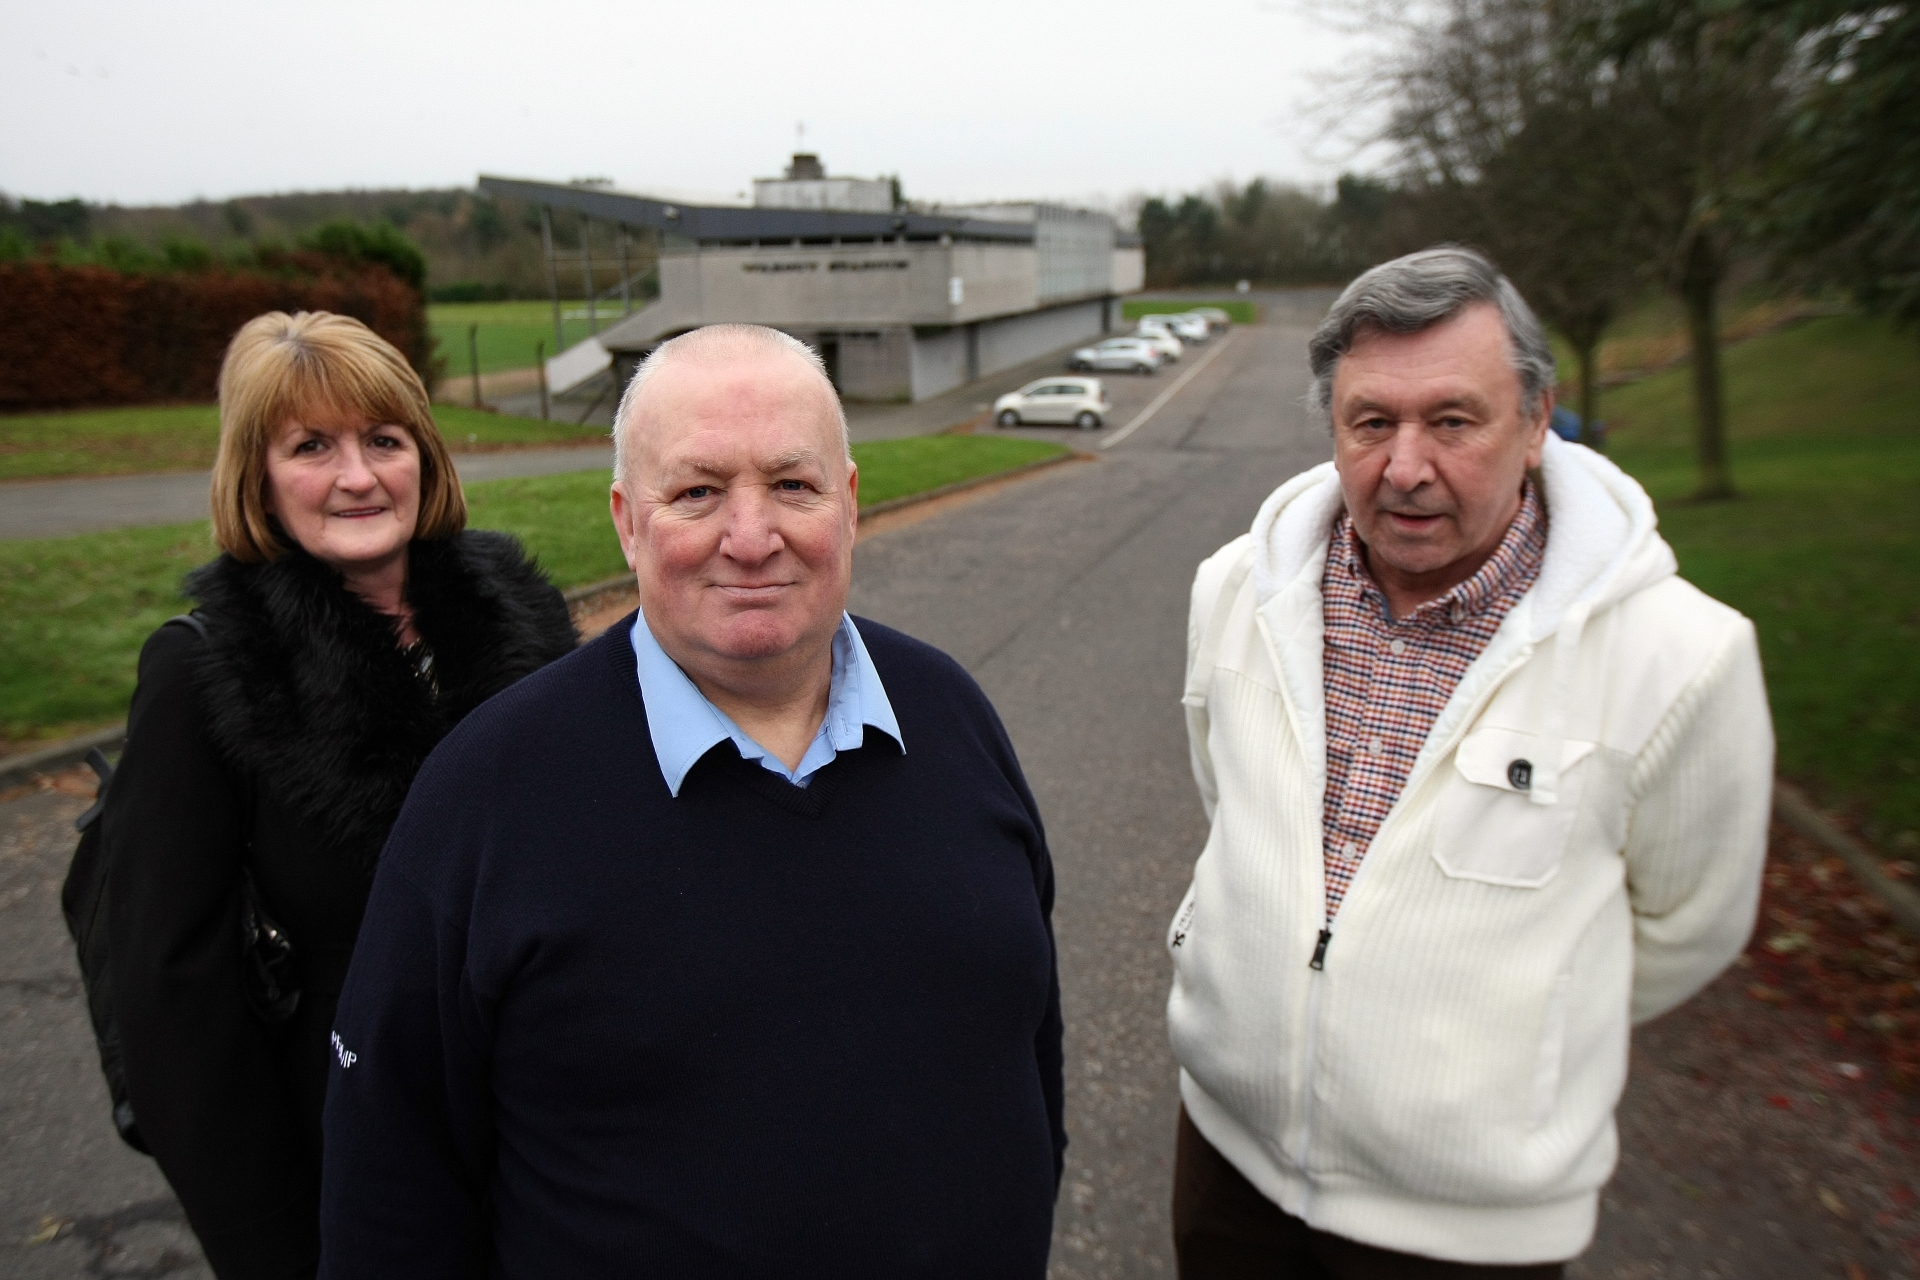 Picture shows SheIla Mitchell, from Auchmuty and Dovecot Tenants Association, Davie Nelson and Ian Robertson - Glenrothes Area Residents Federation (GARF).